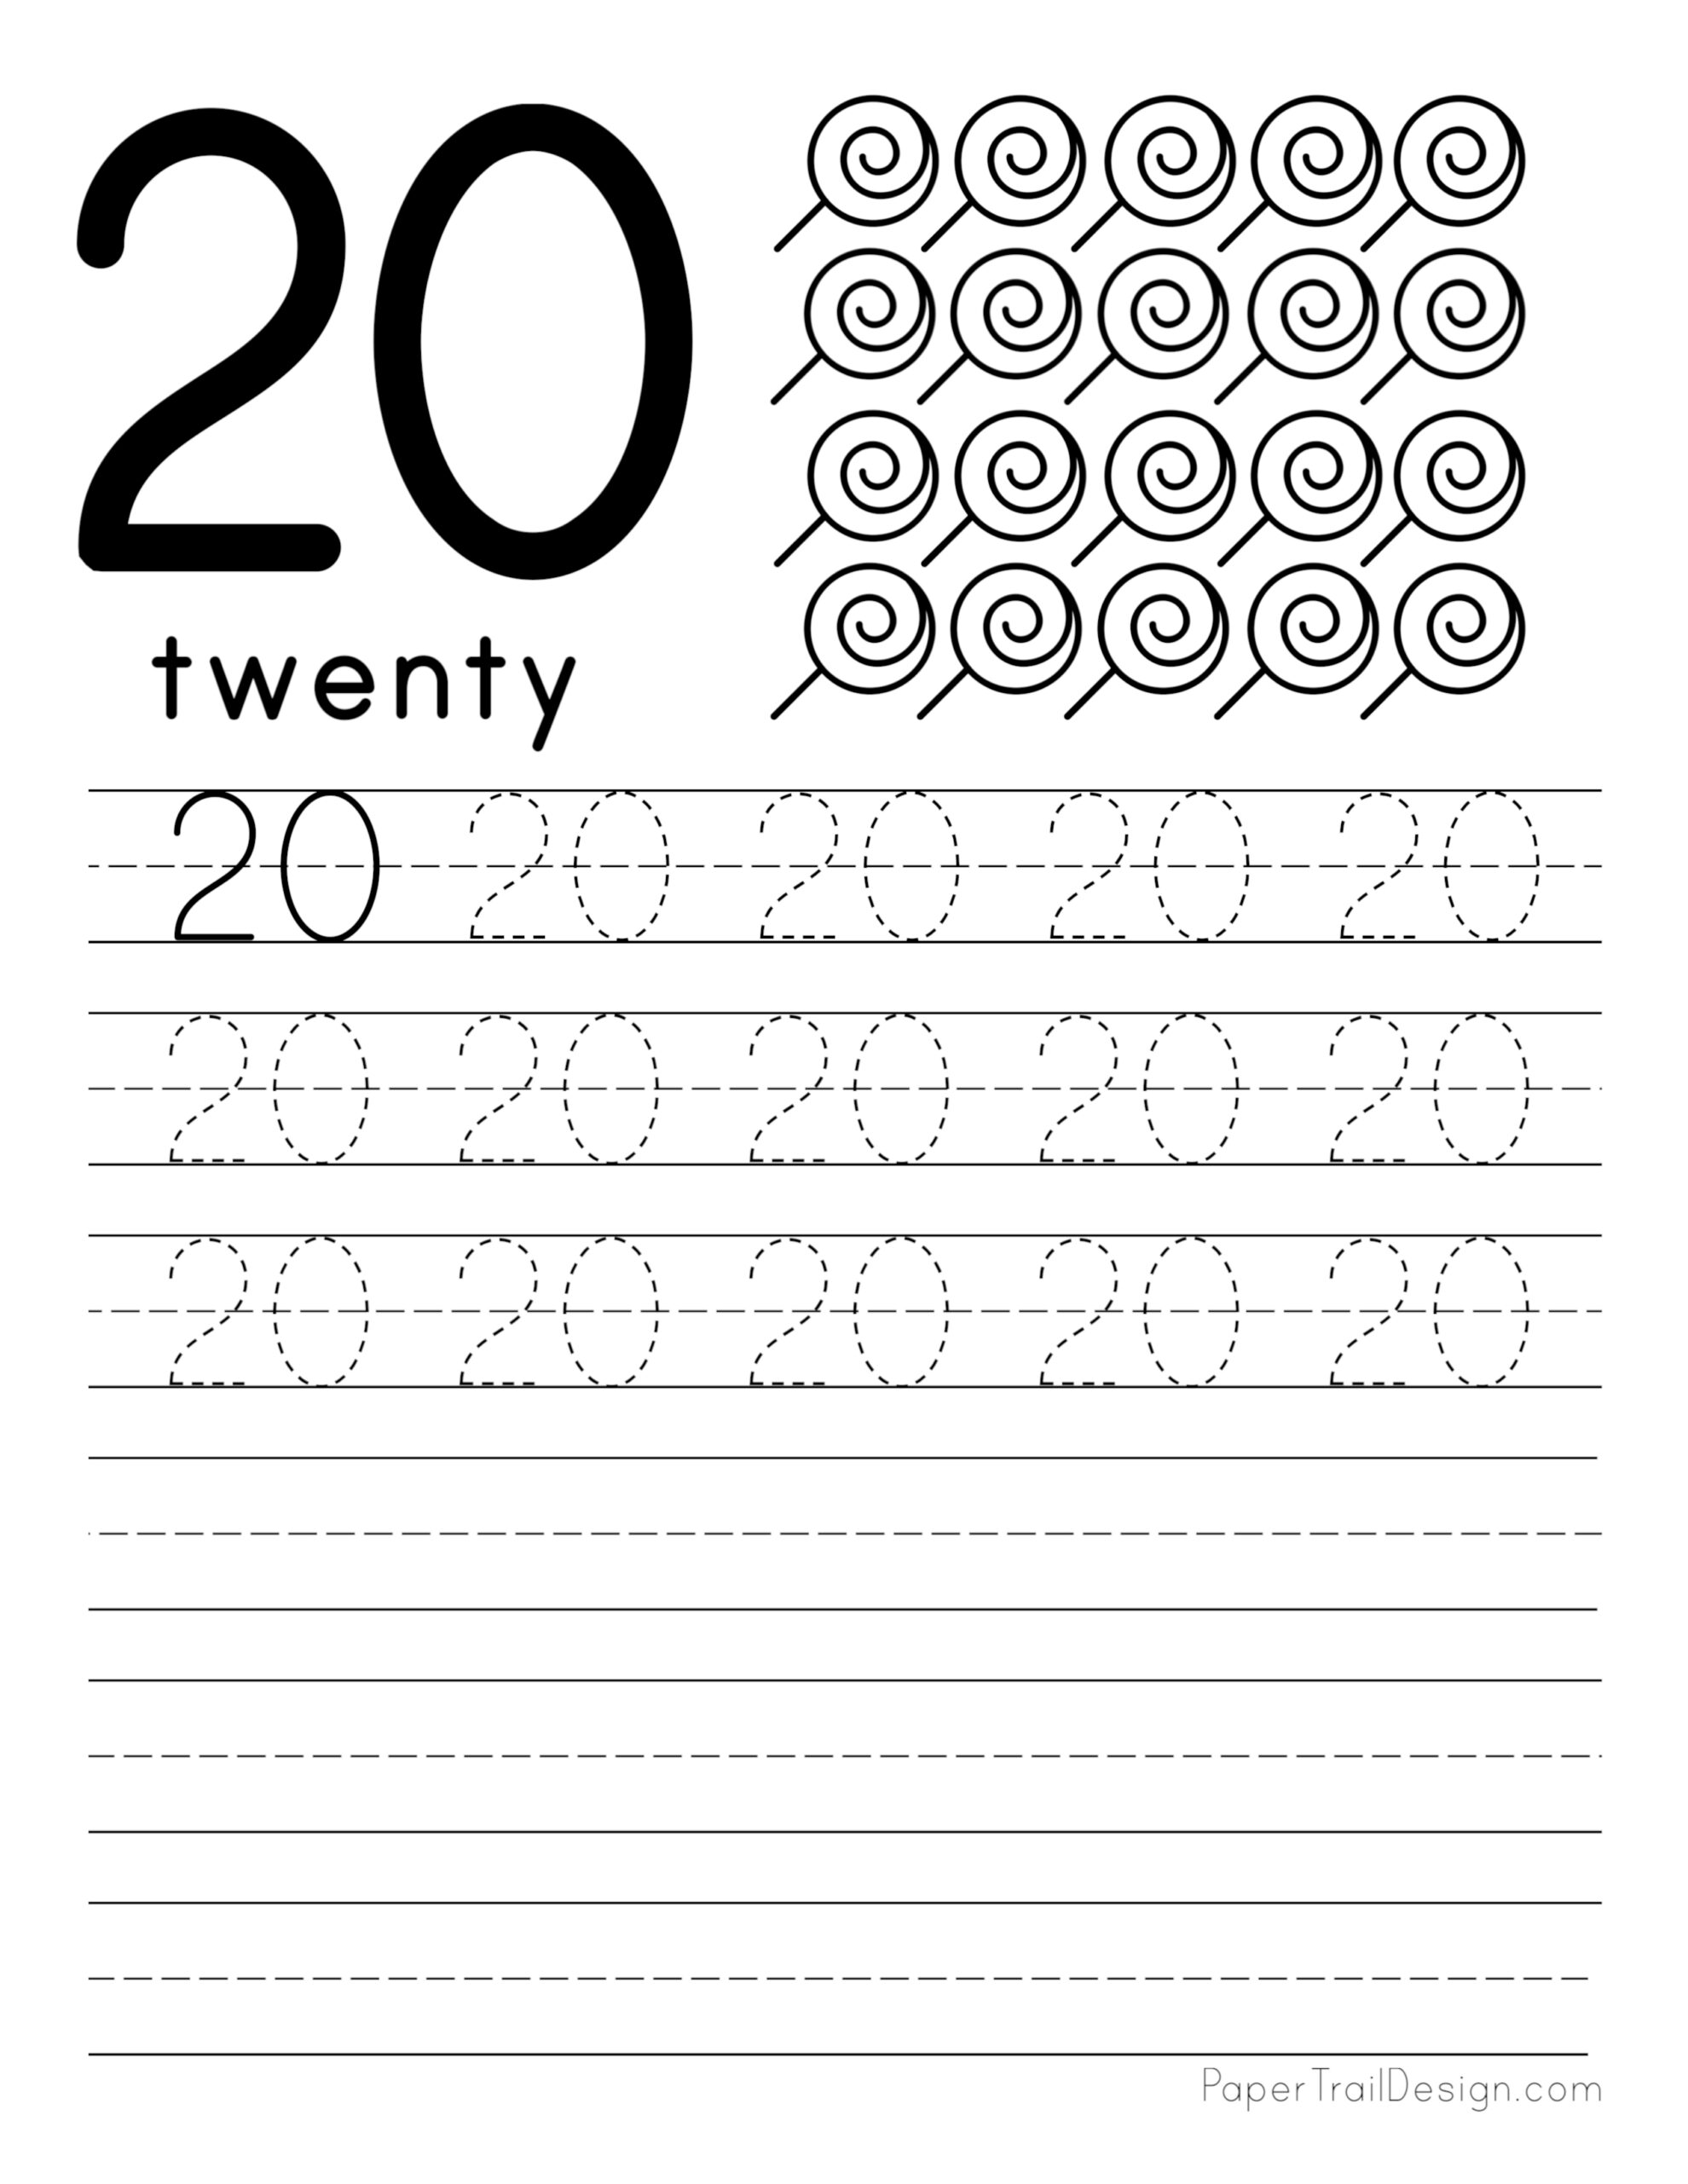 free-printable-worksheets-for-kids-tracing-numbers-1-20-worksheets-free-printable-worksheets